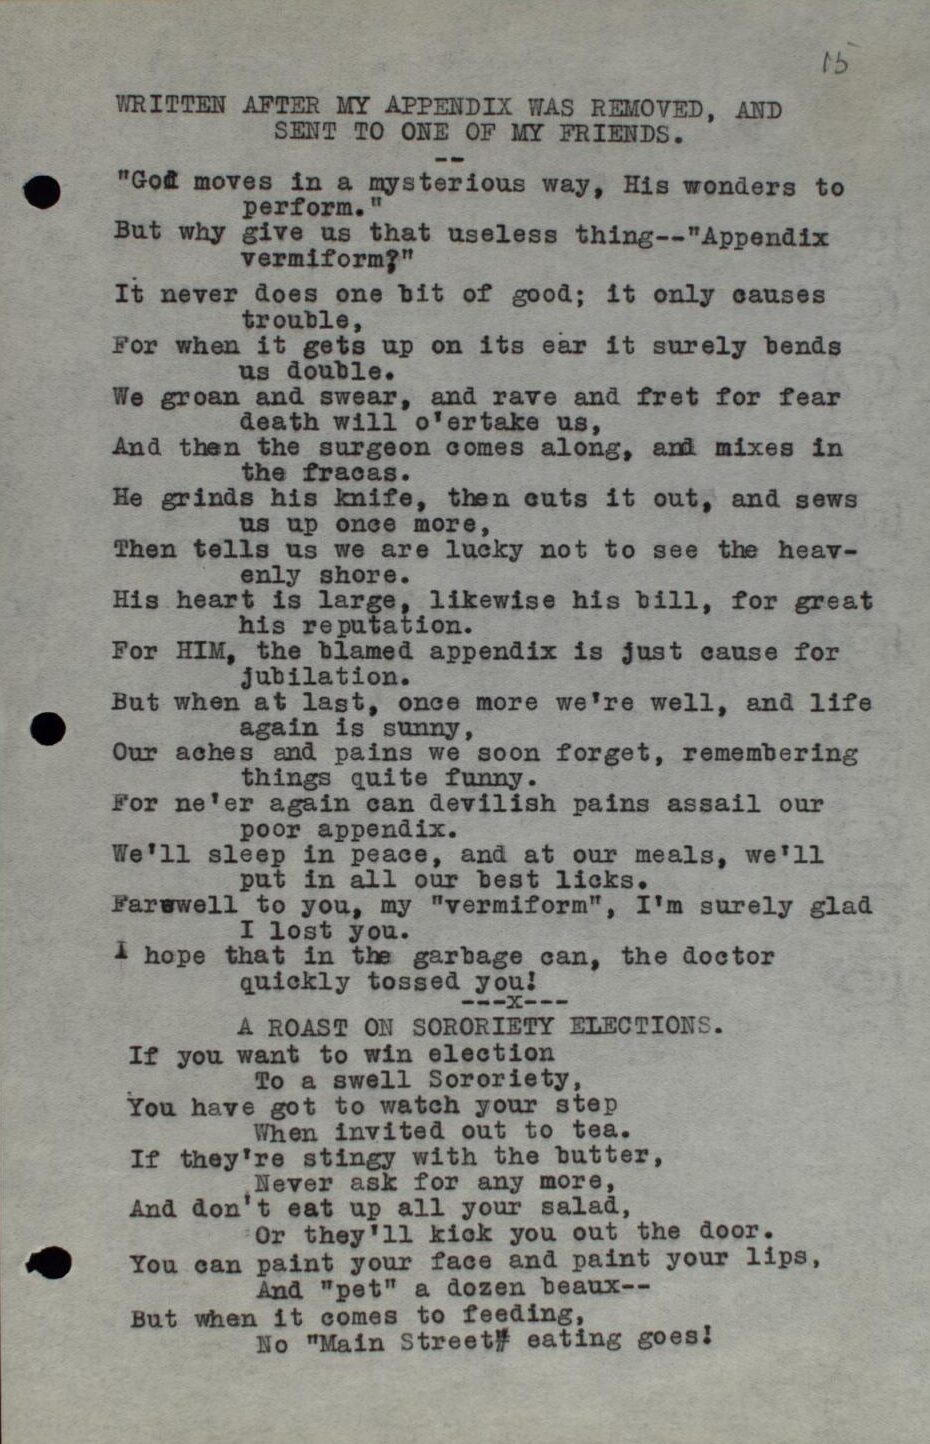 Typescript of Will Hampton poem entitled "Written After My Appendix Was Removed, And Sent to One of My Friends."